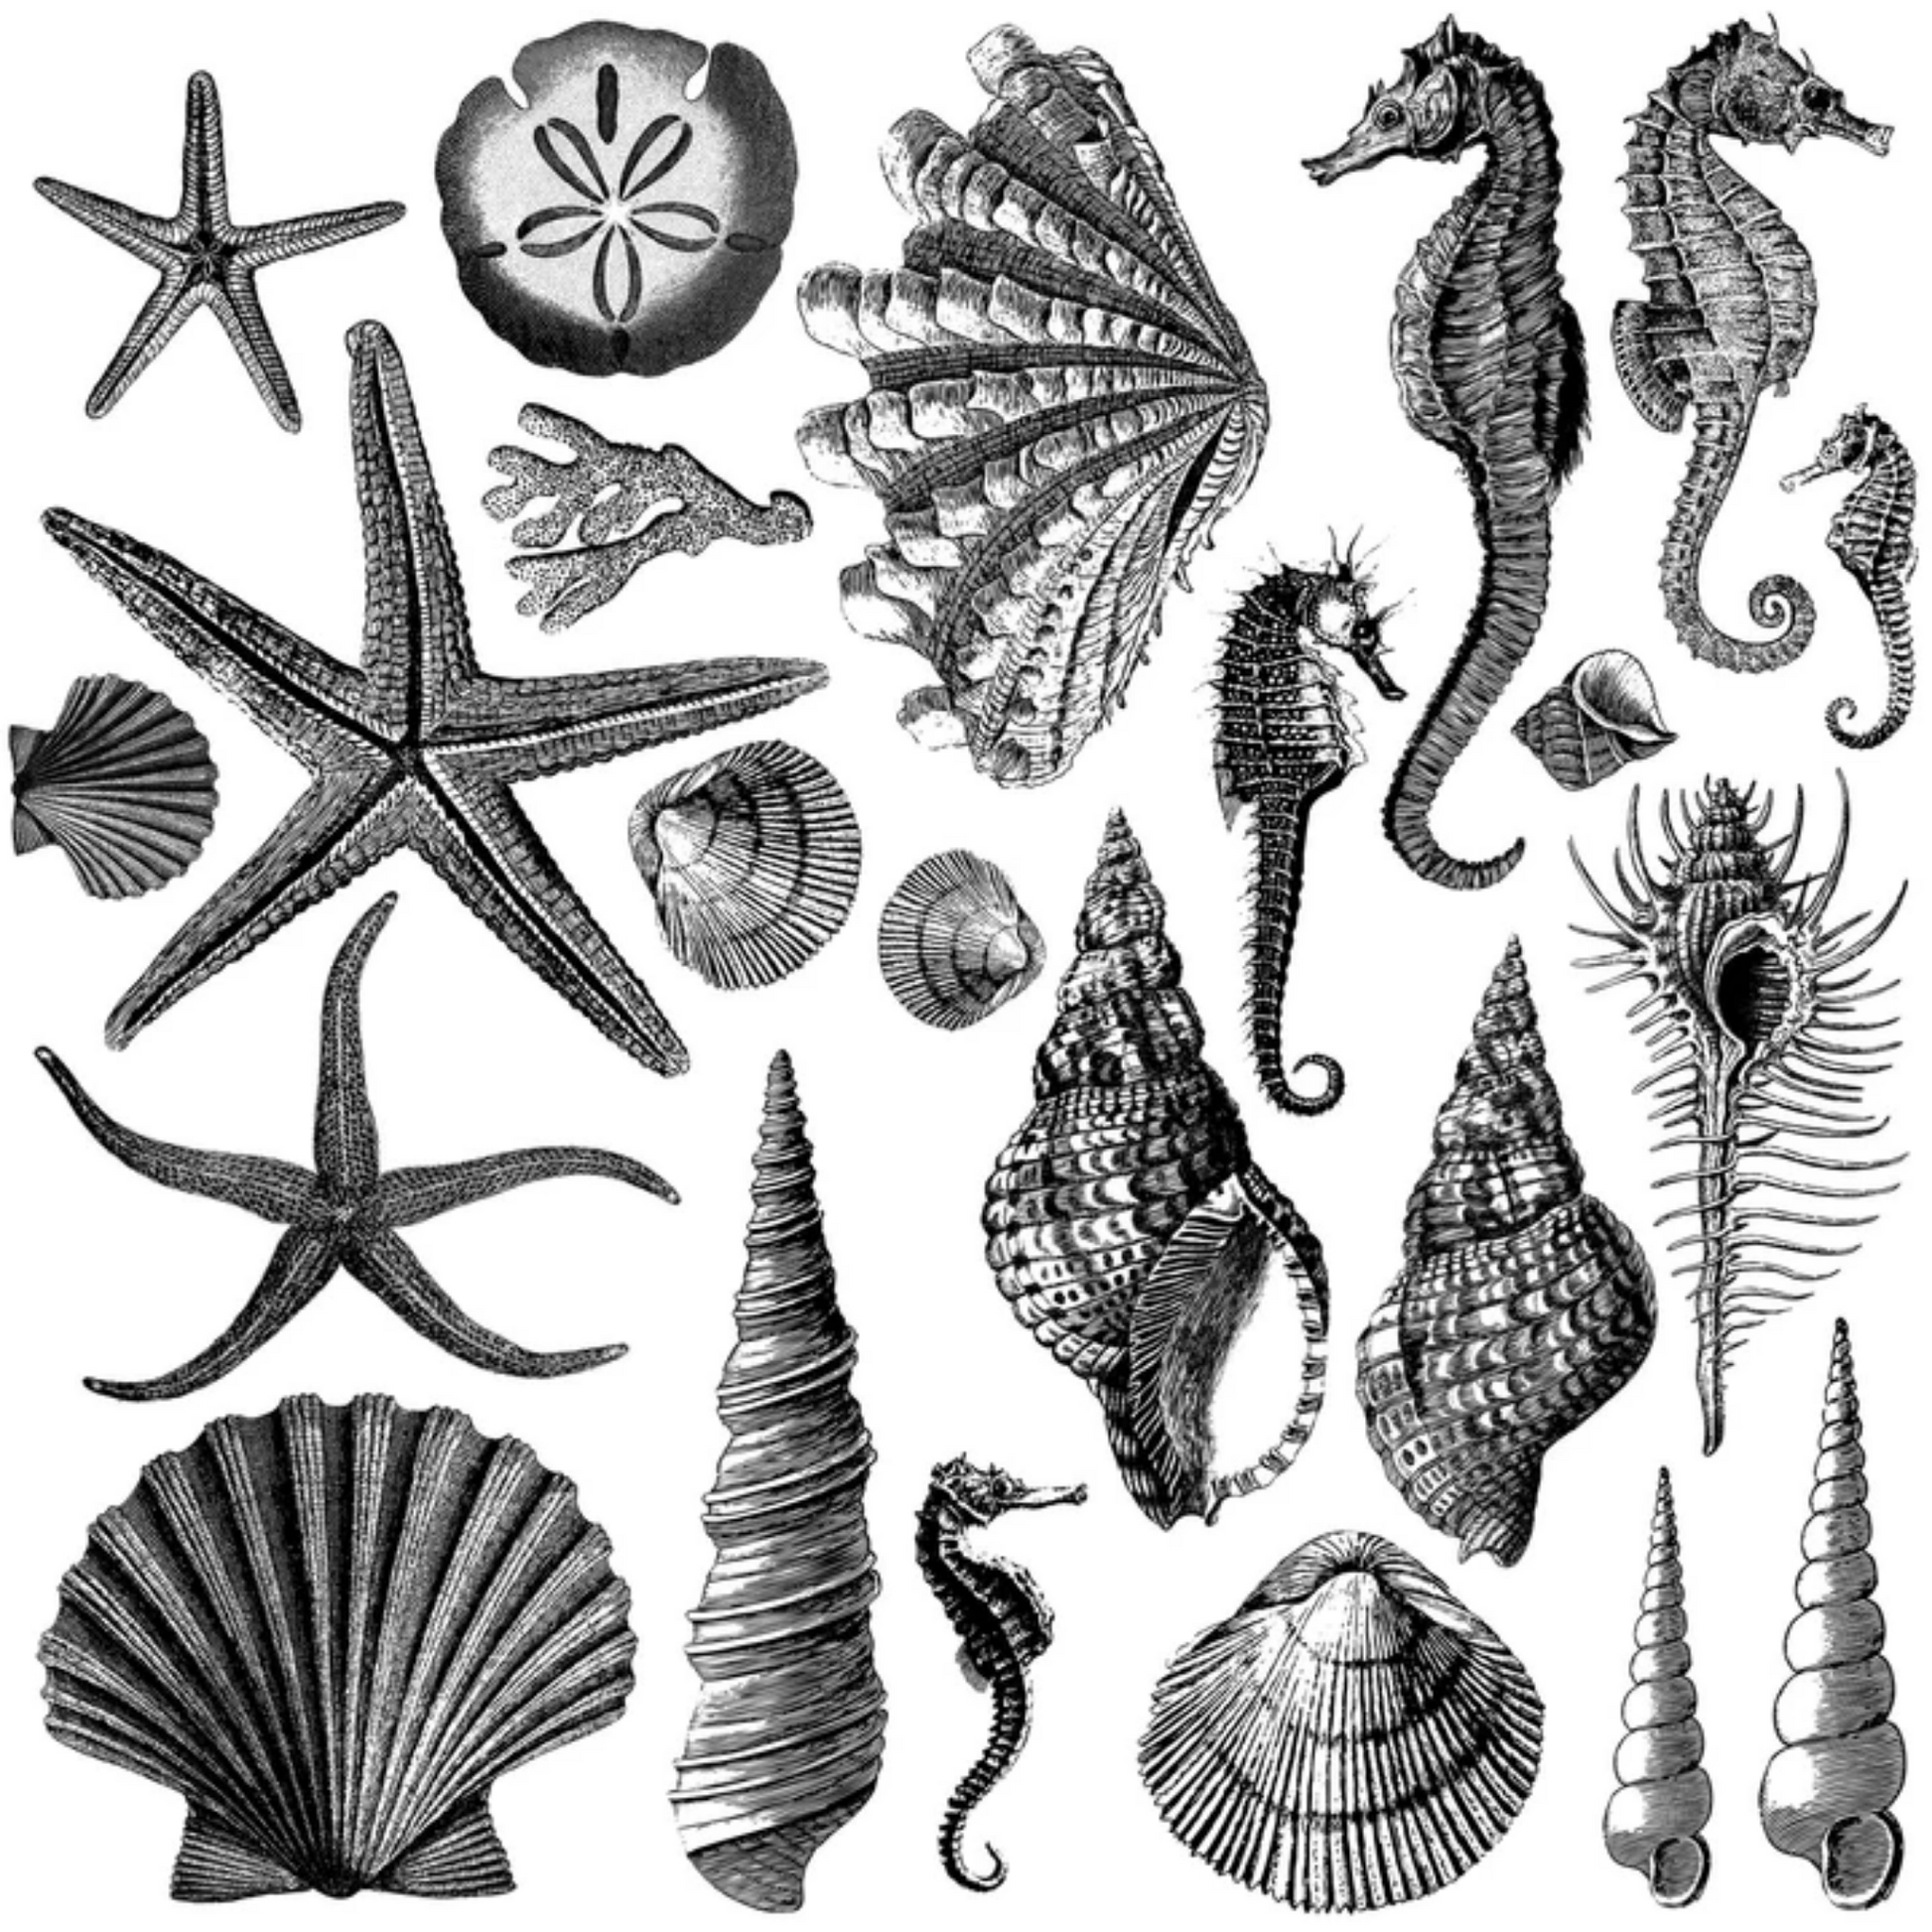 Stamp of multiple sea shell patterns includes conch shells, scallops, oyster shells, starfish, seaweed, sand dollars, sea horses at Milton's Daughter.